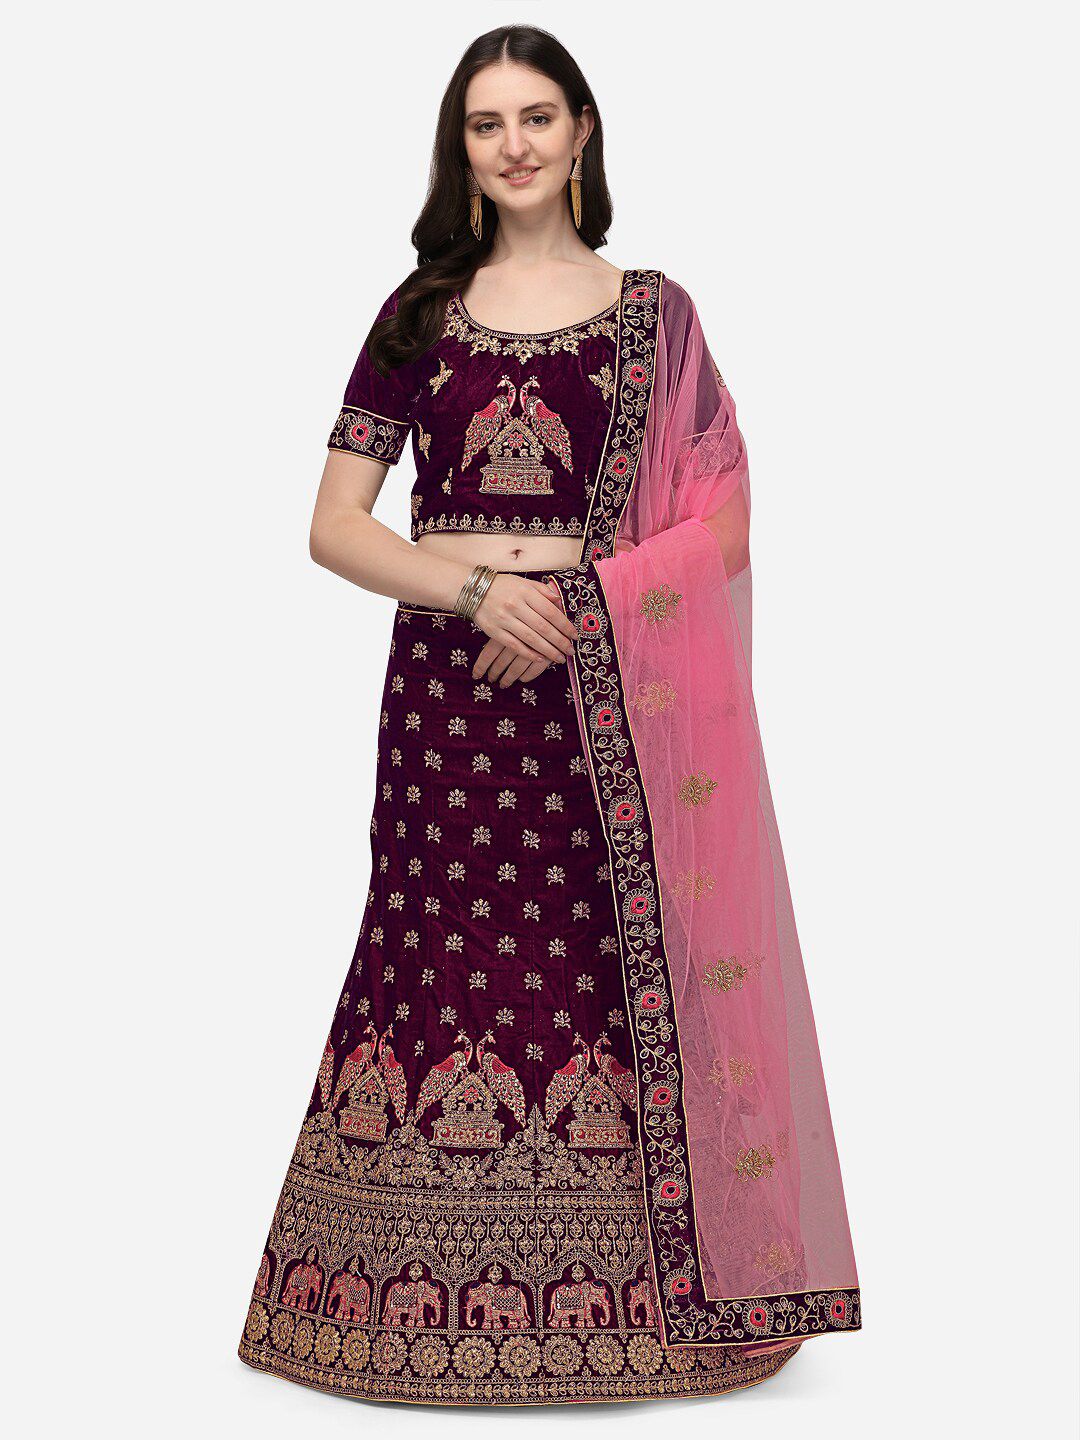 VRSALES Purple & Pink Embroidered Sequinned Semi-Stitched Lehenga & Unstitched Blouse With Dupatta Price in India